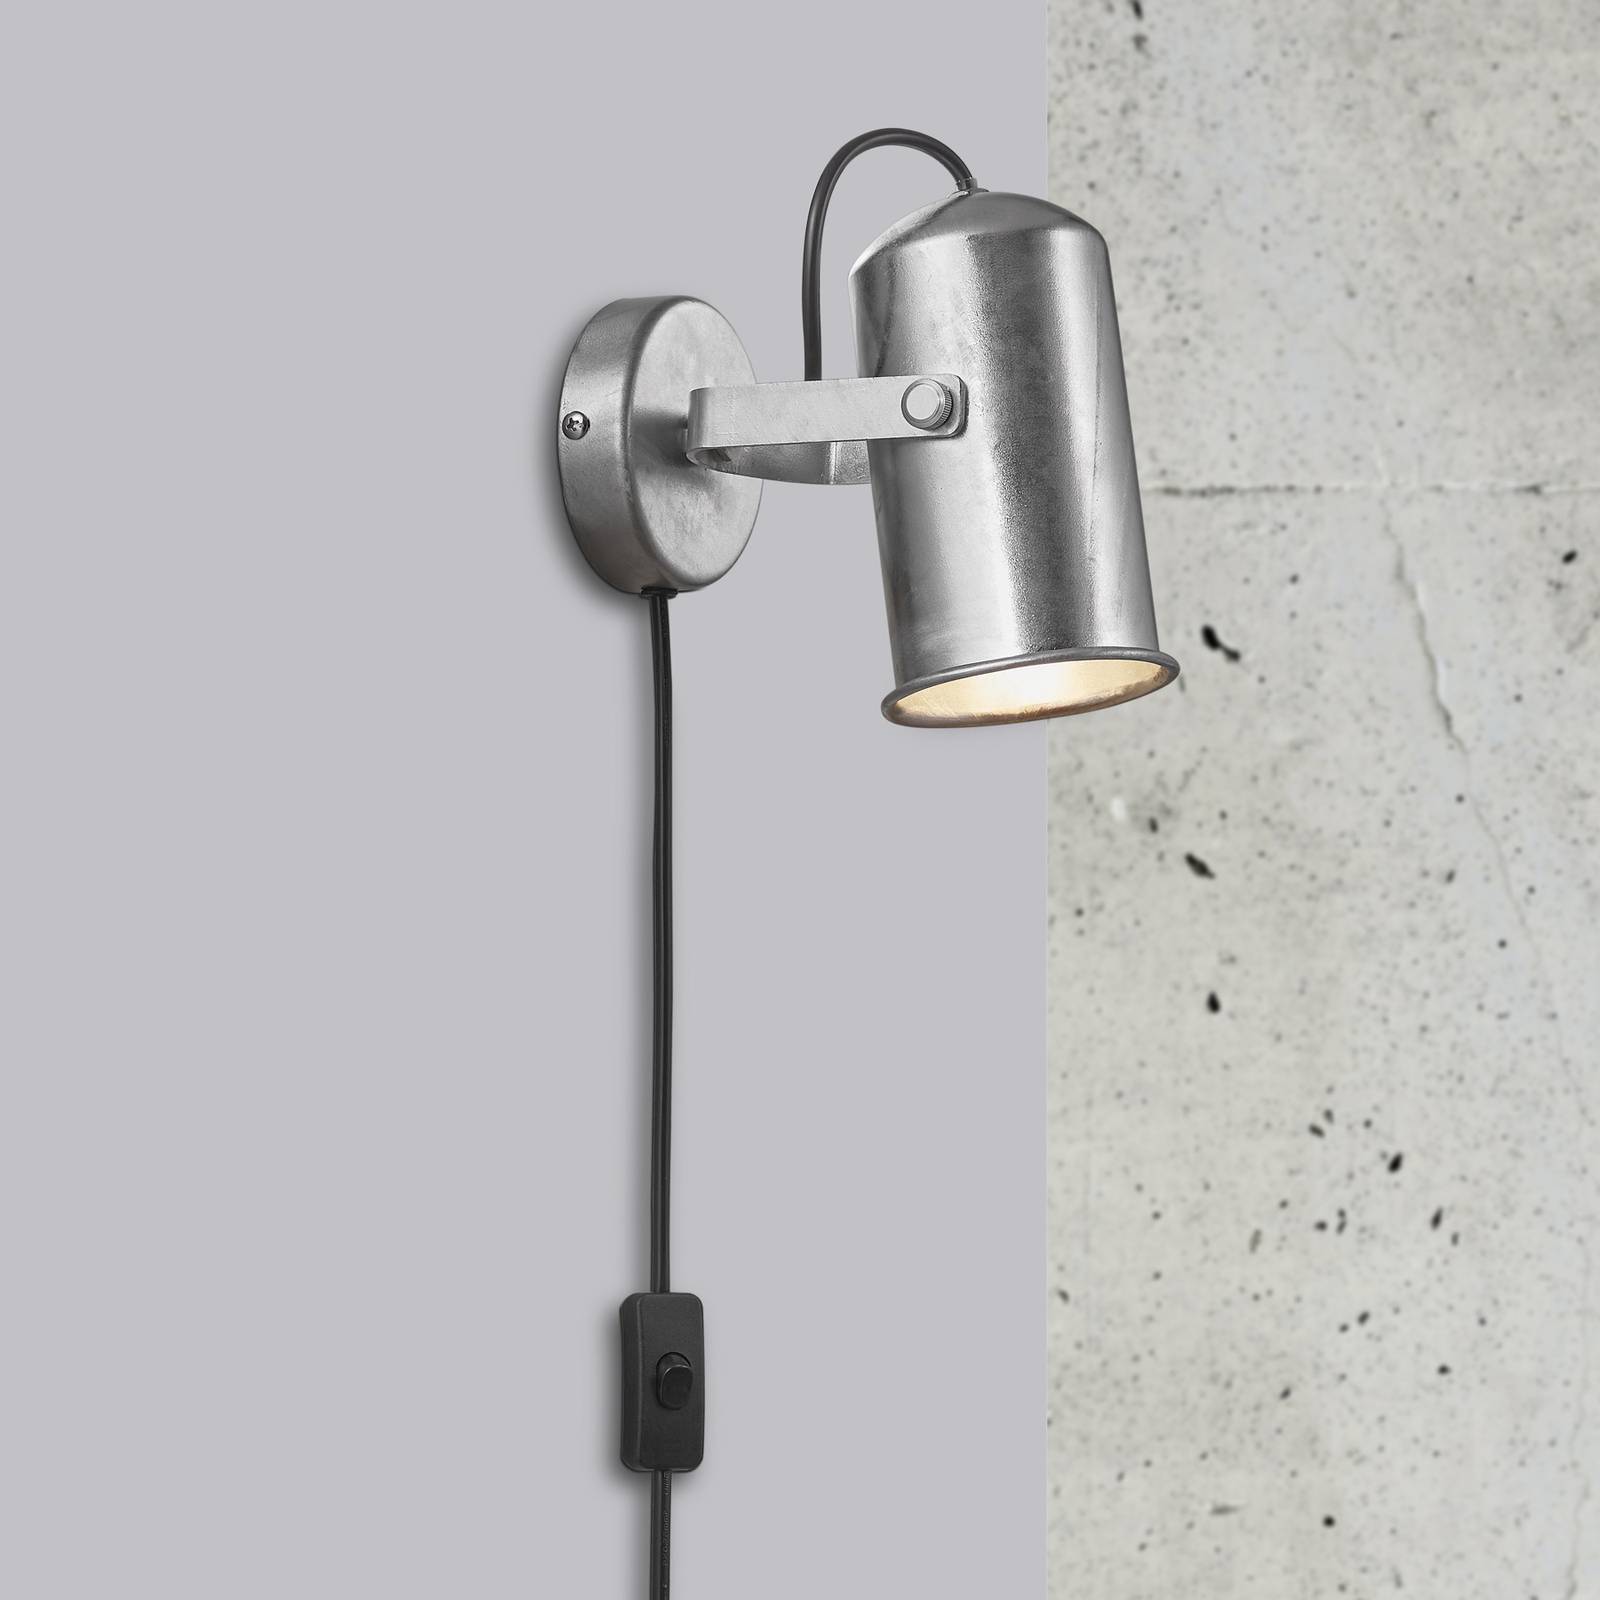 Photos - Chandelier / Lamp Nordlux Porter industrial-look wall light with plug 